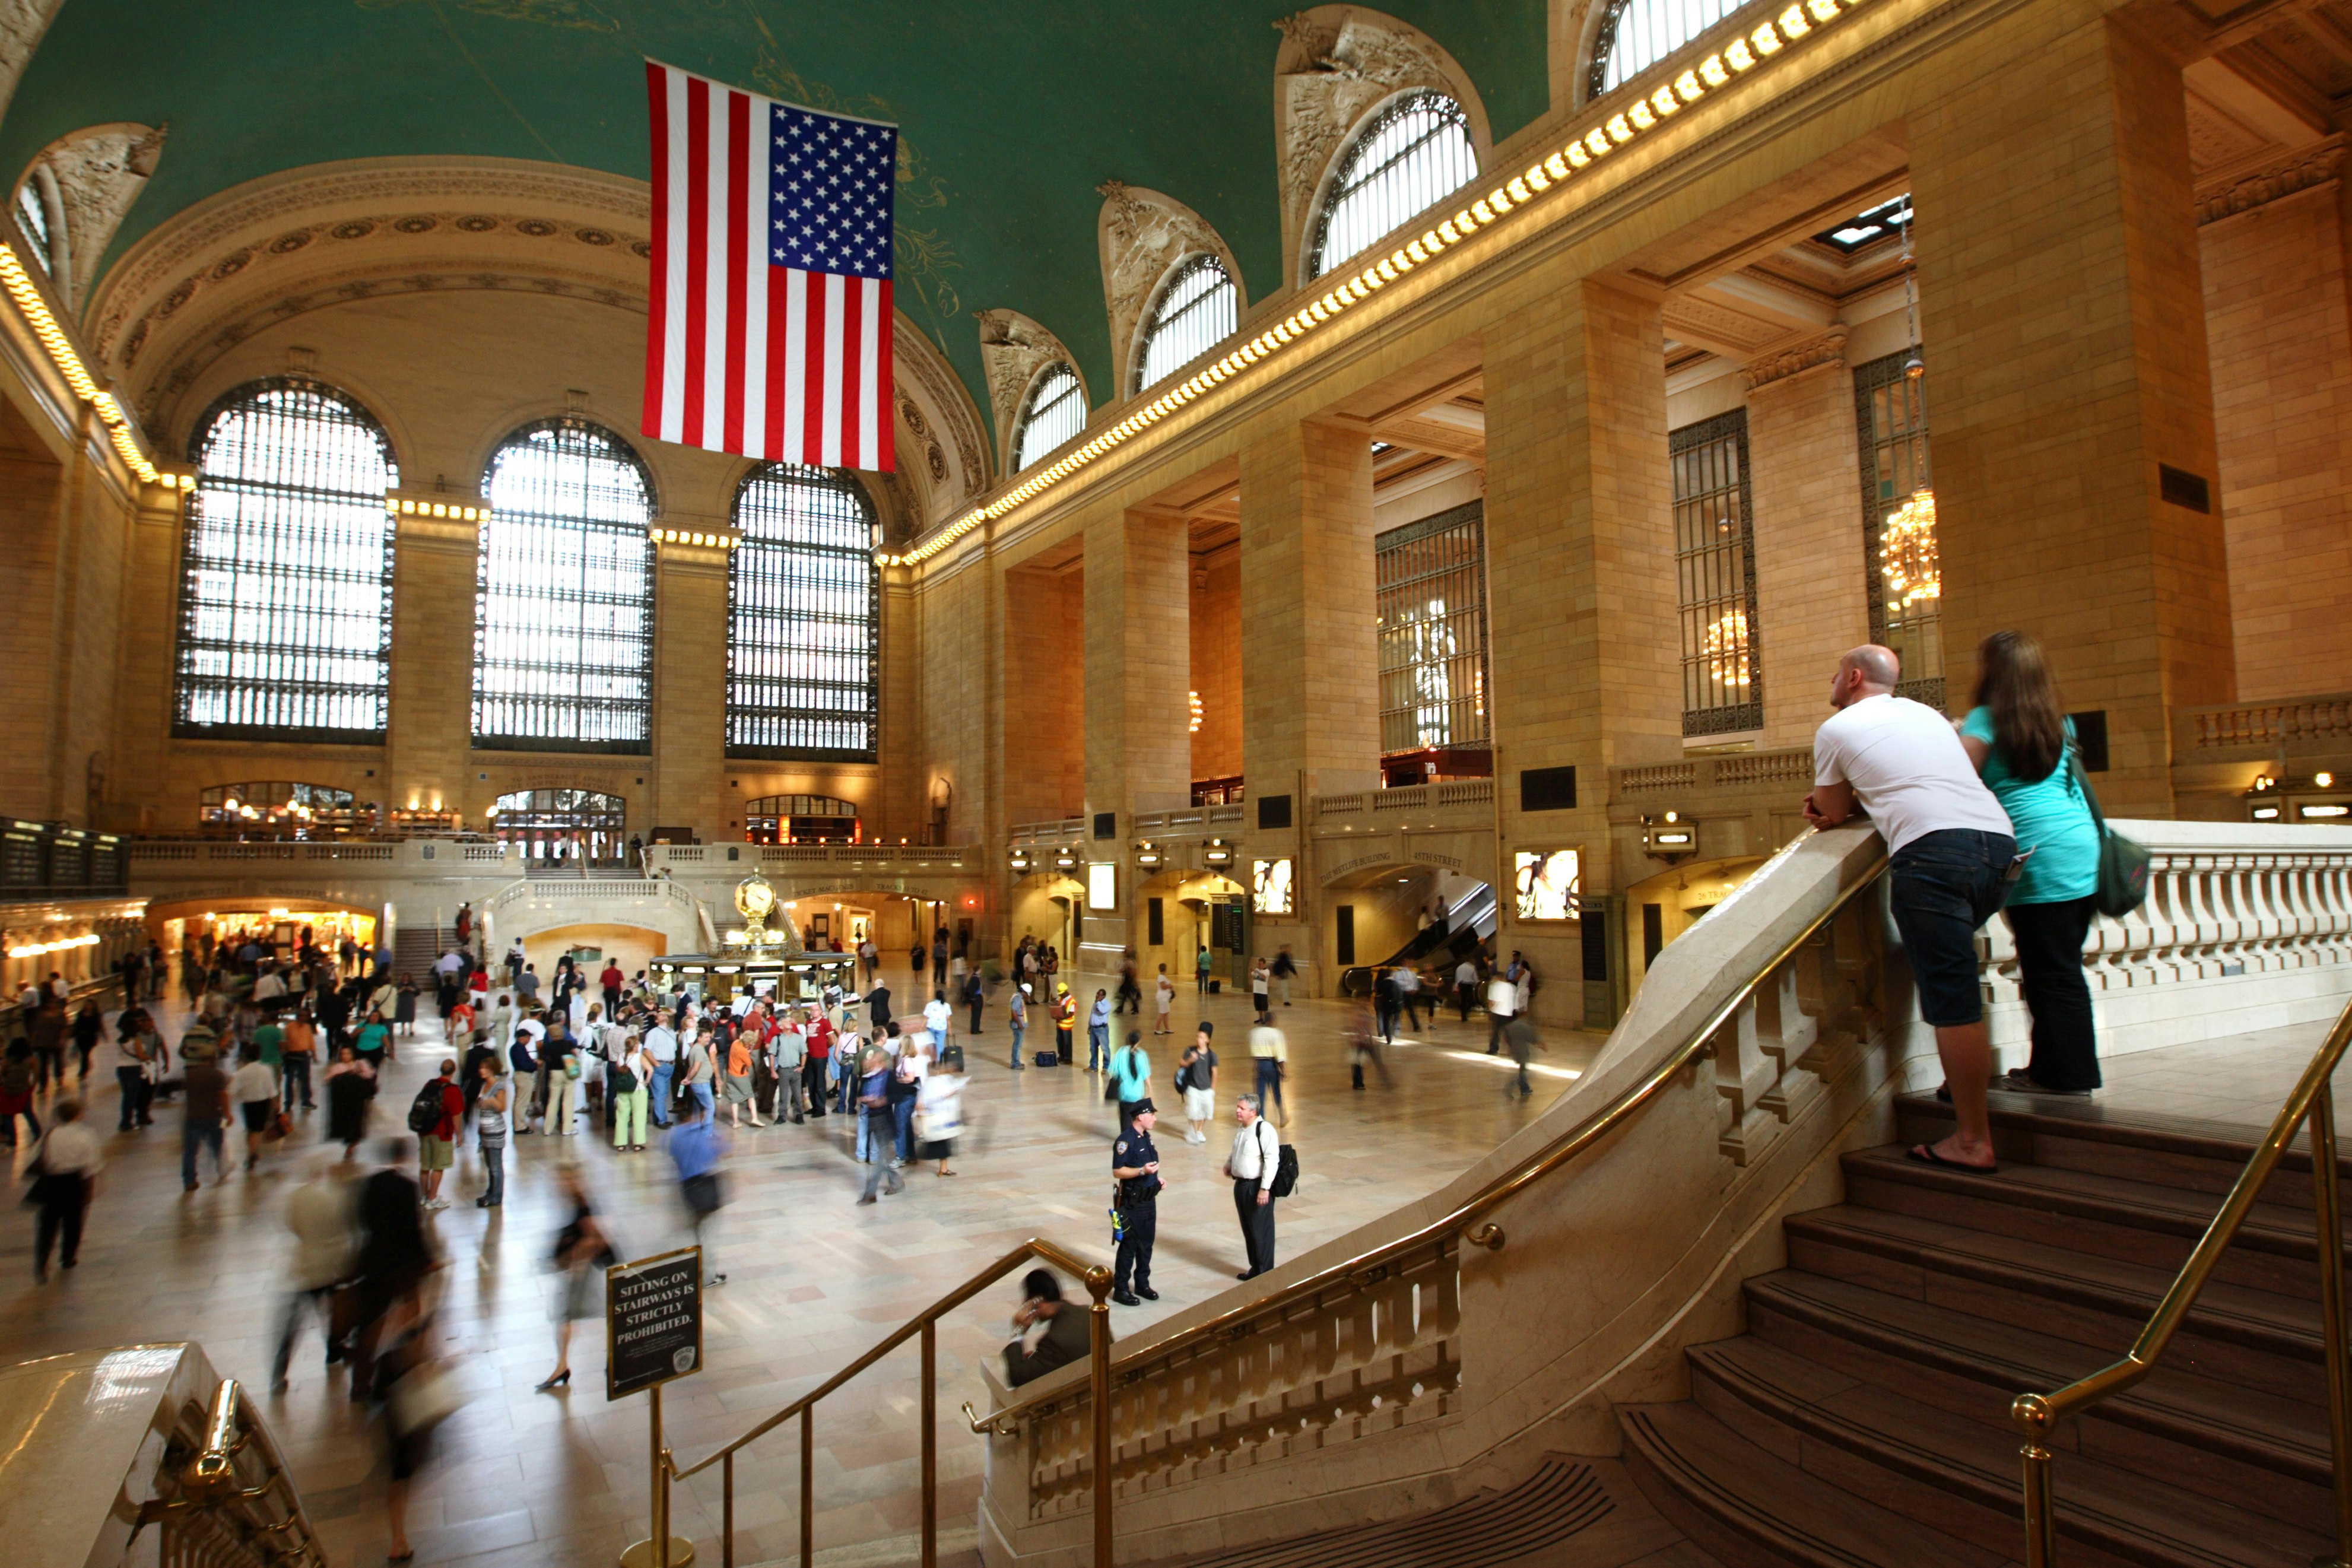 Grand Staircase in Main Concourse of Grand Central Terminal railway station